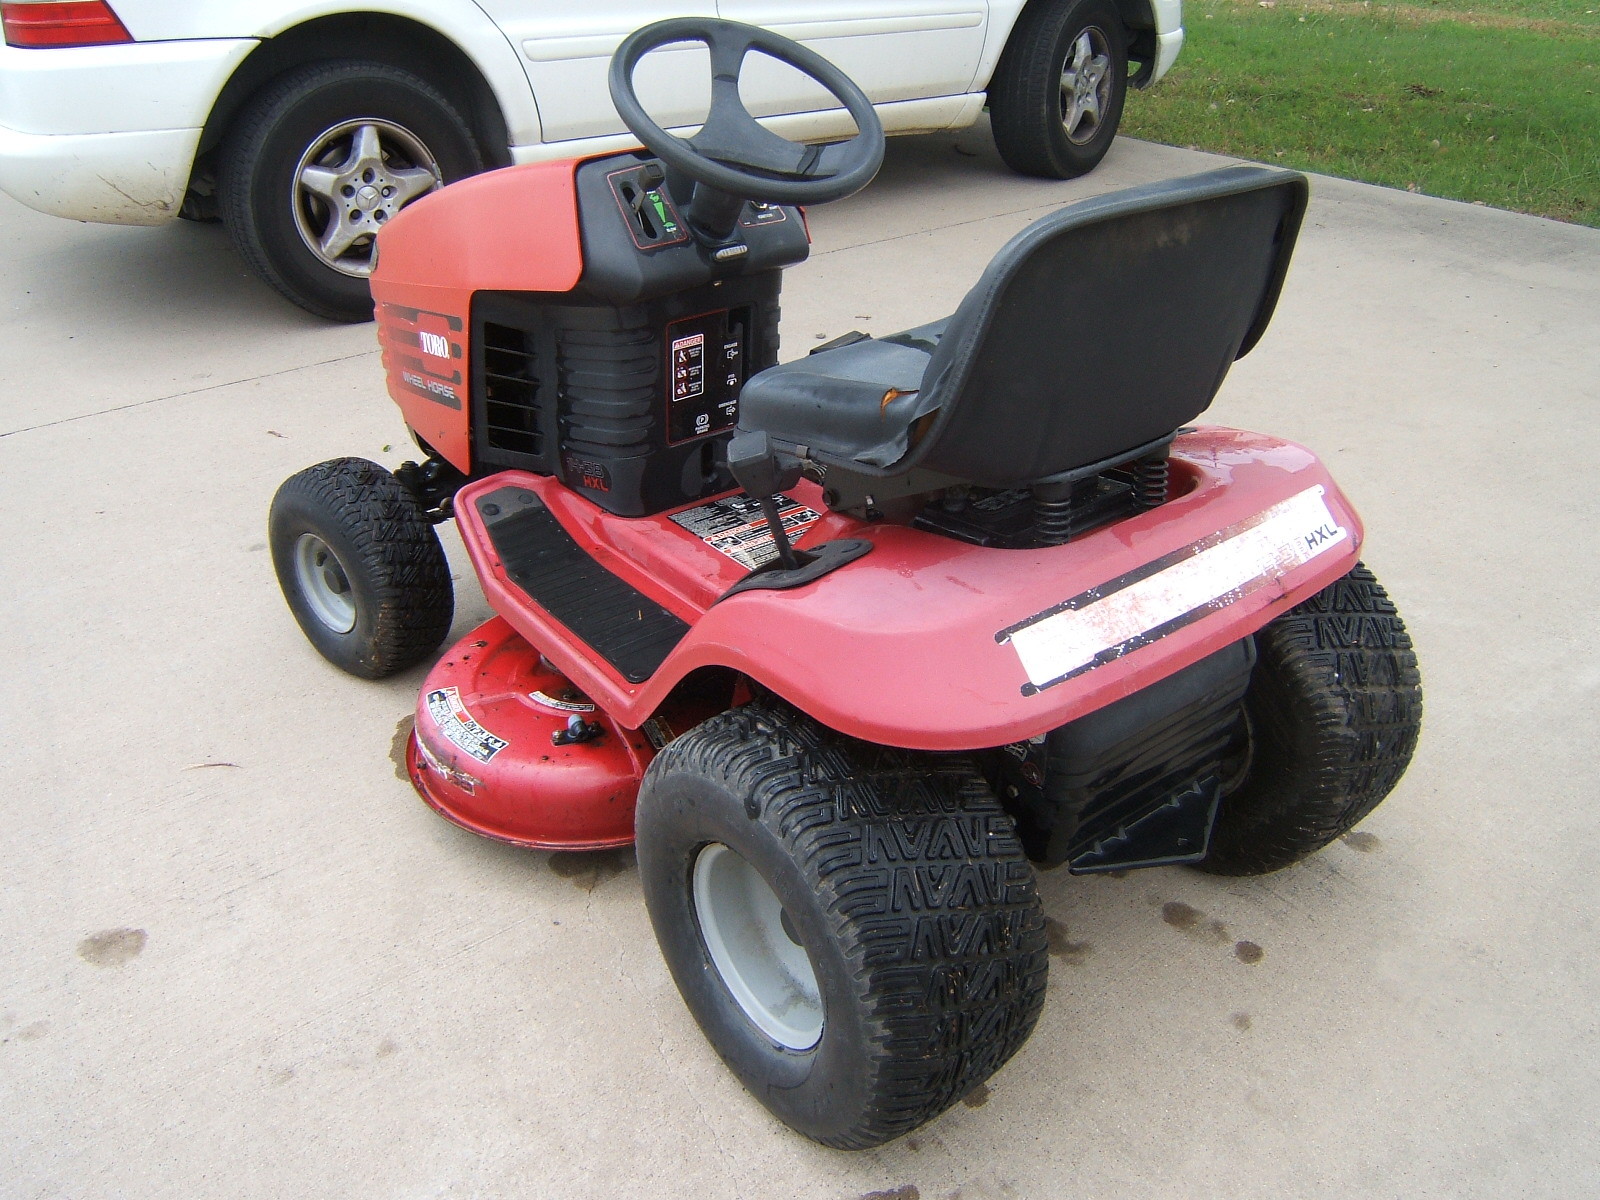 Toro Wheel Horse 14-38 HXL Riding Mower photo, picture, image on Use ...